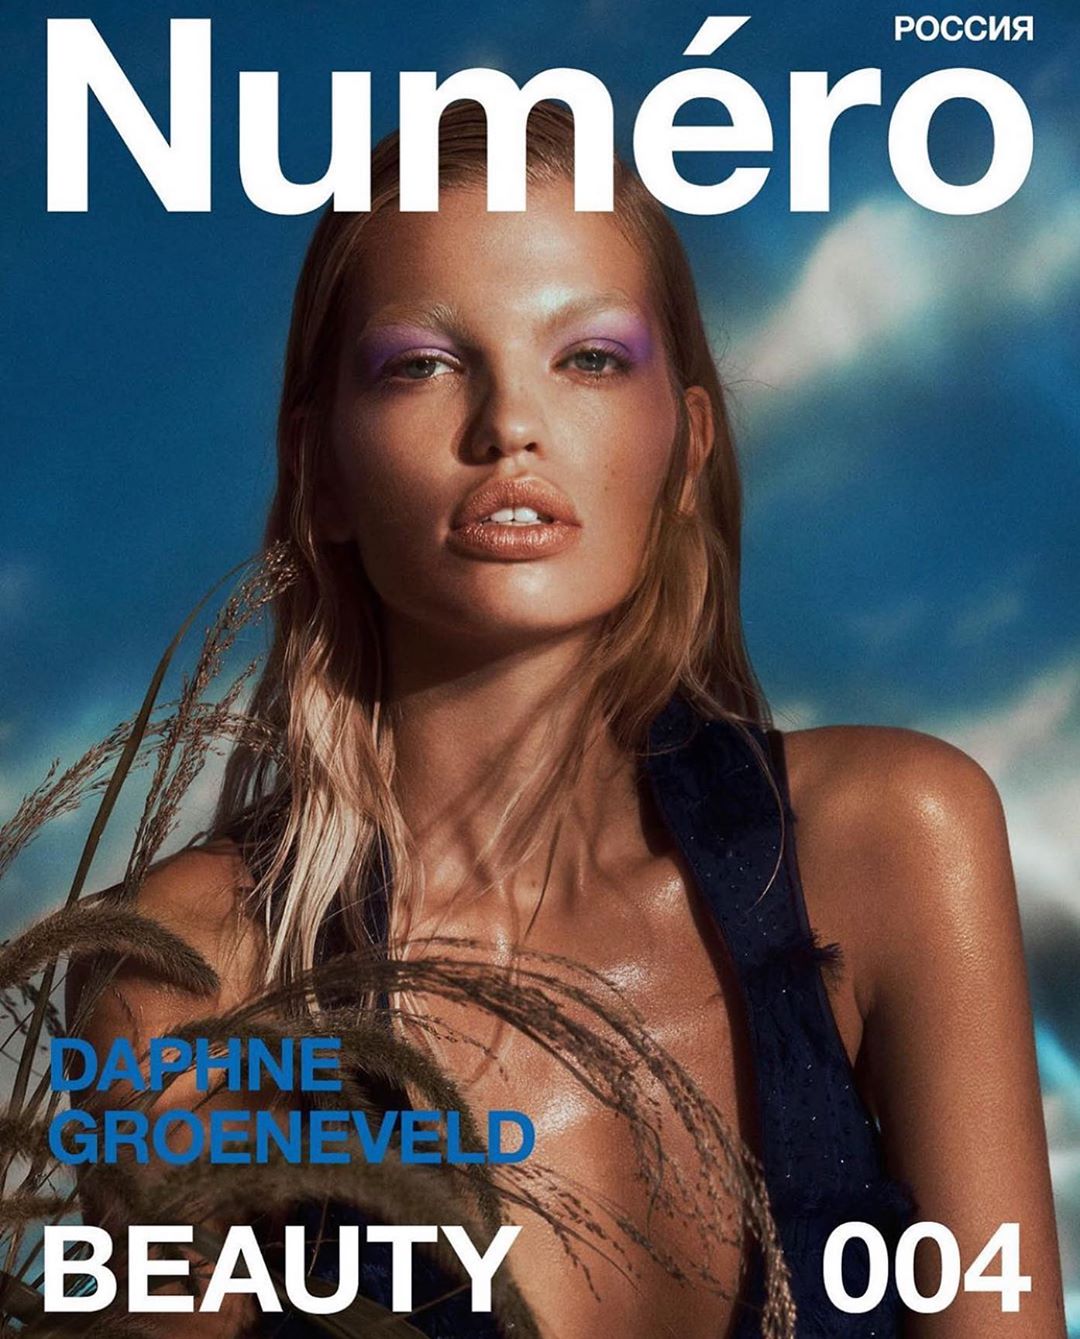 Numéro Russia Beauty August 2020 Cover Story Editorial